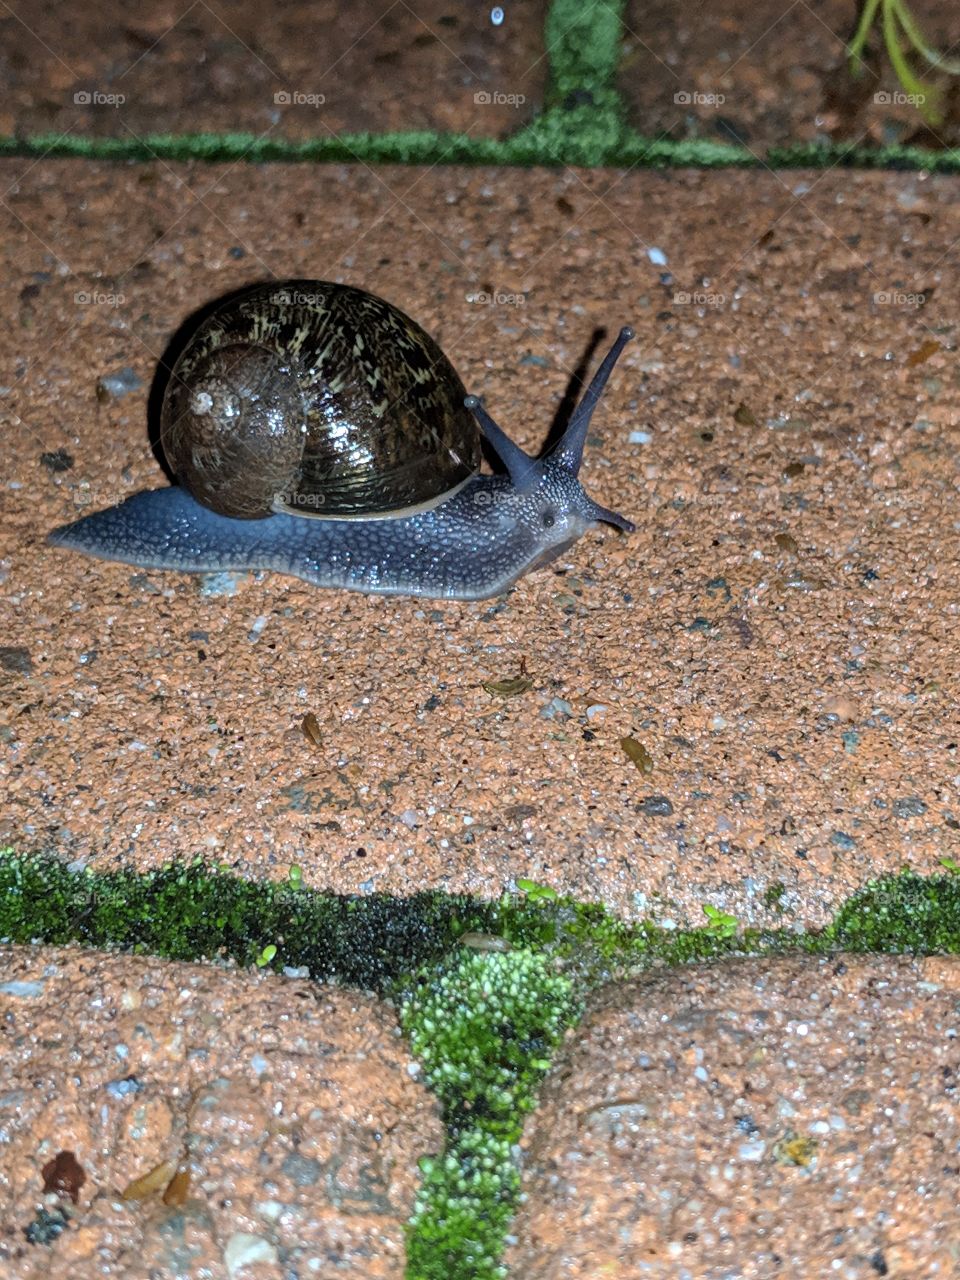 Snail right after a rain storm